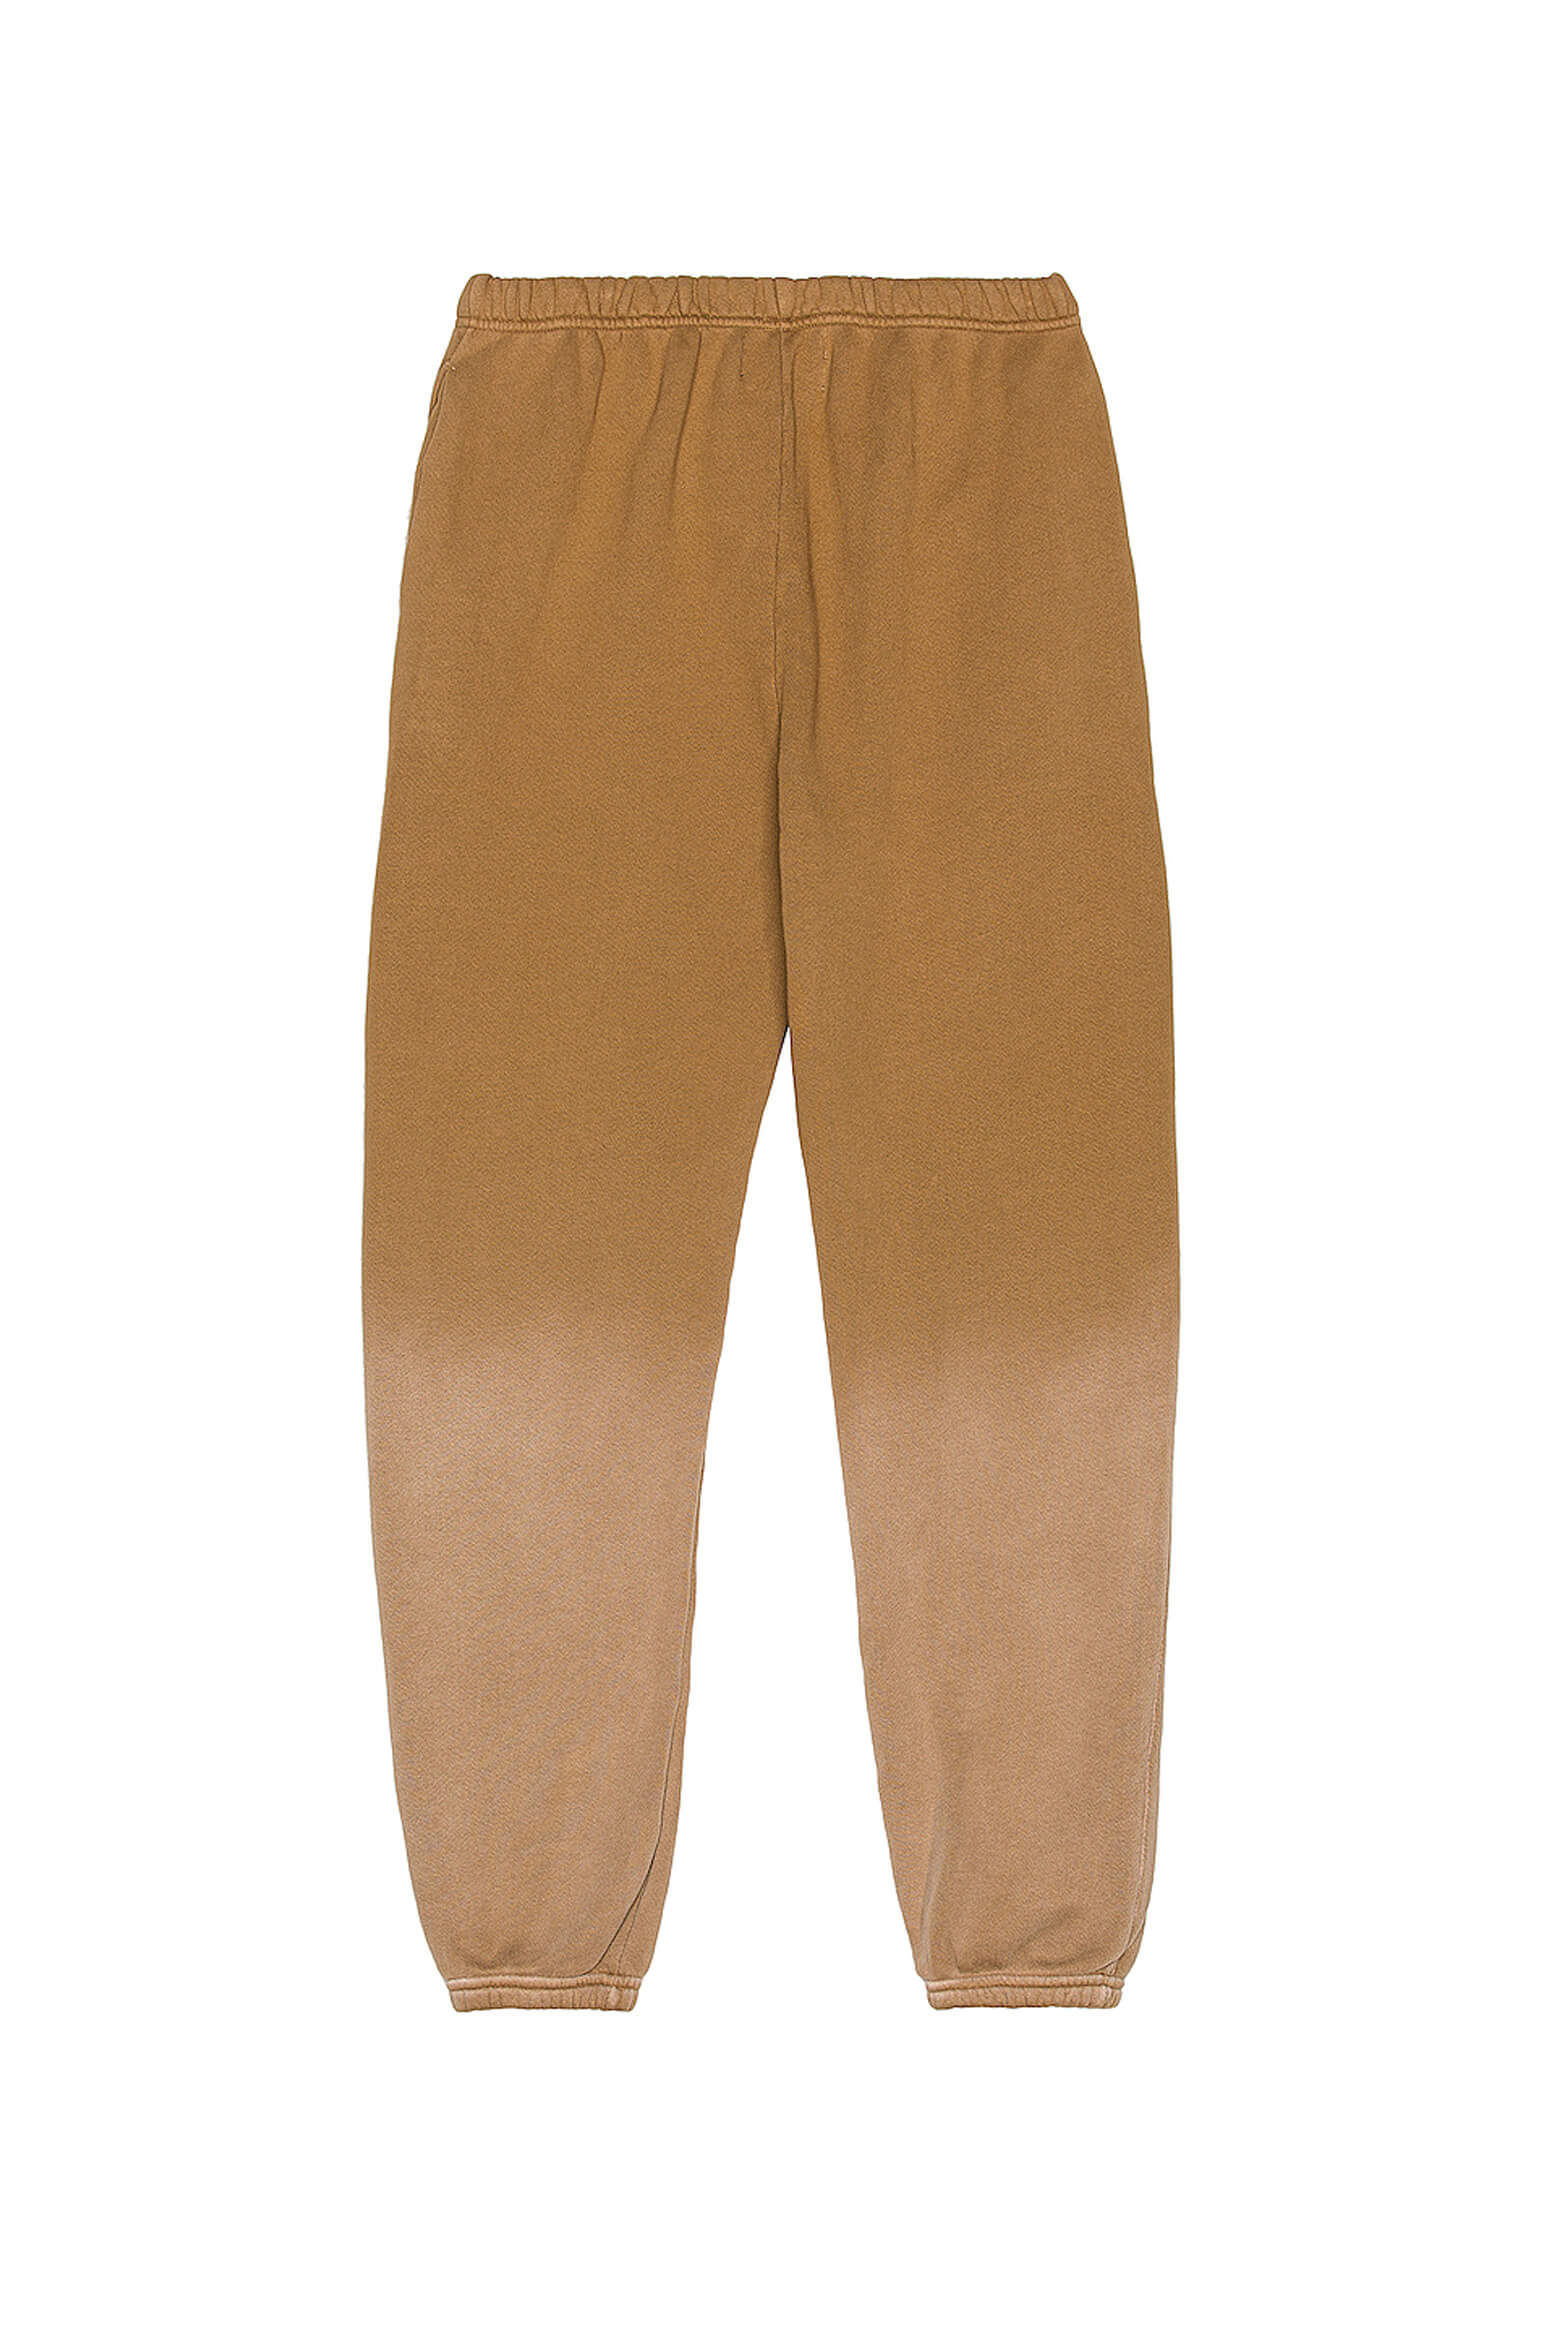 Les Tien Classic Sweatpants in Sand Ombre from The New Trend